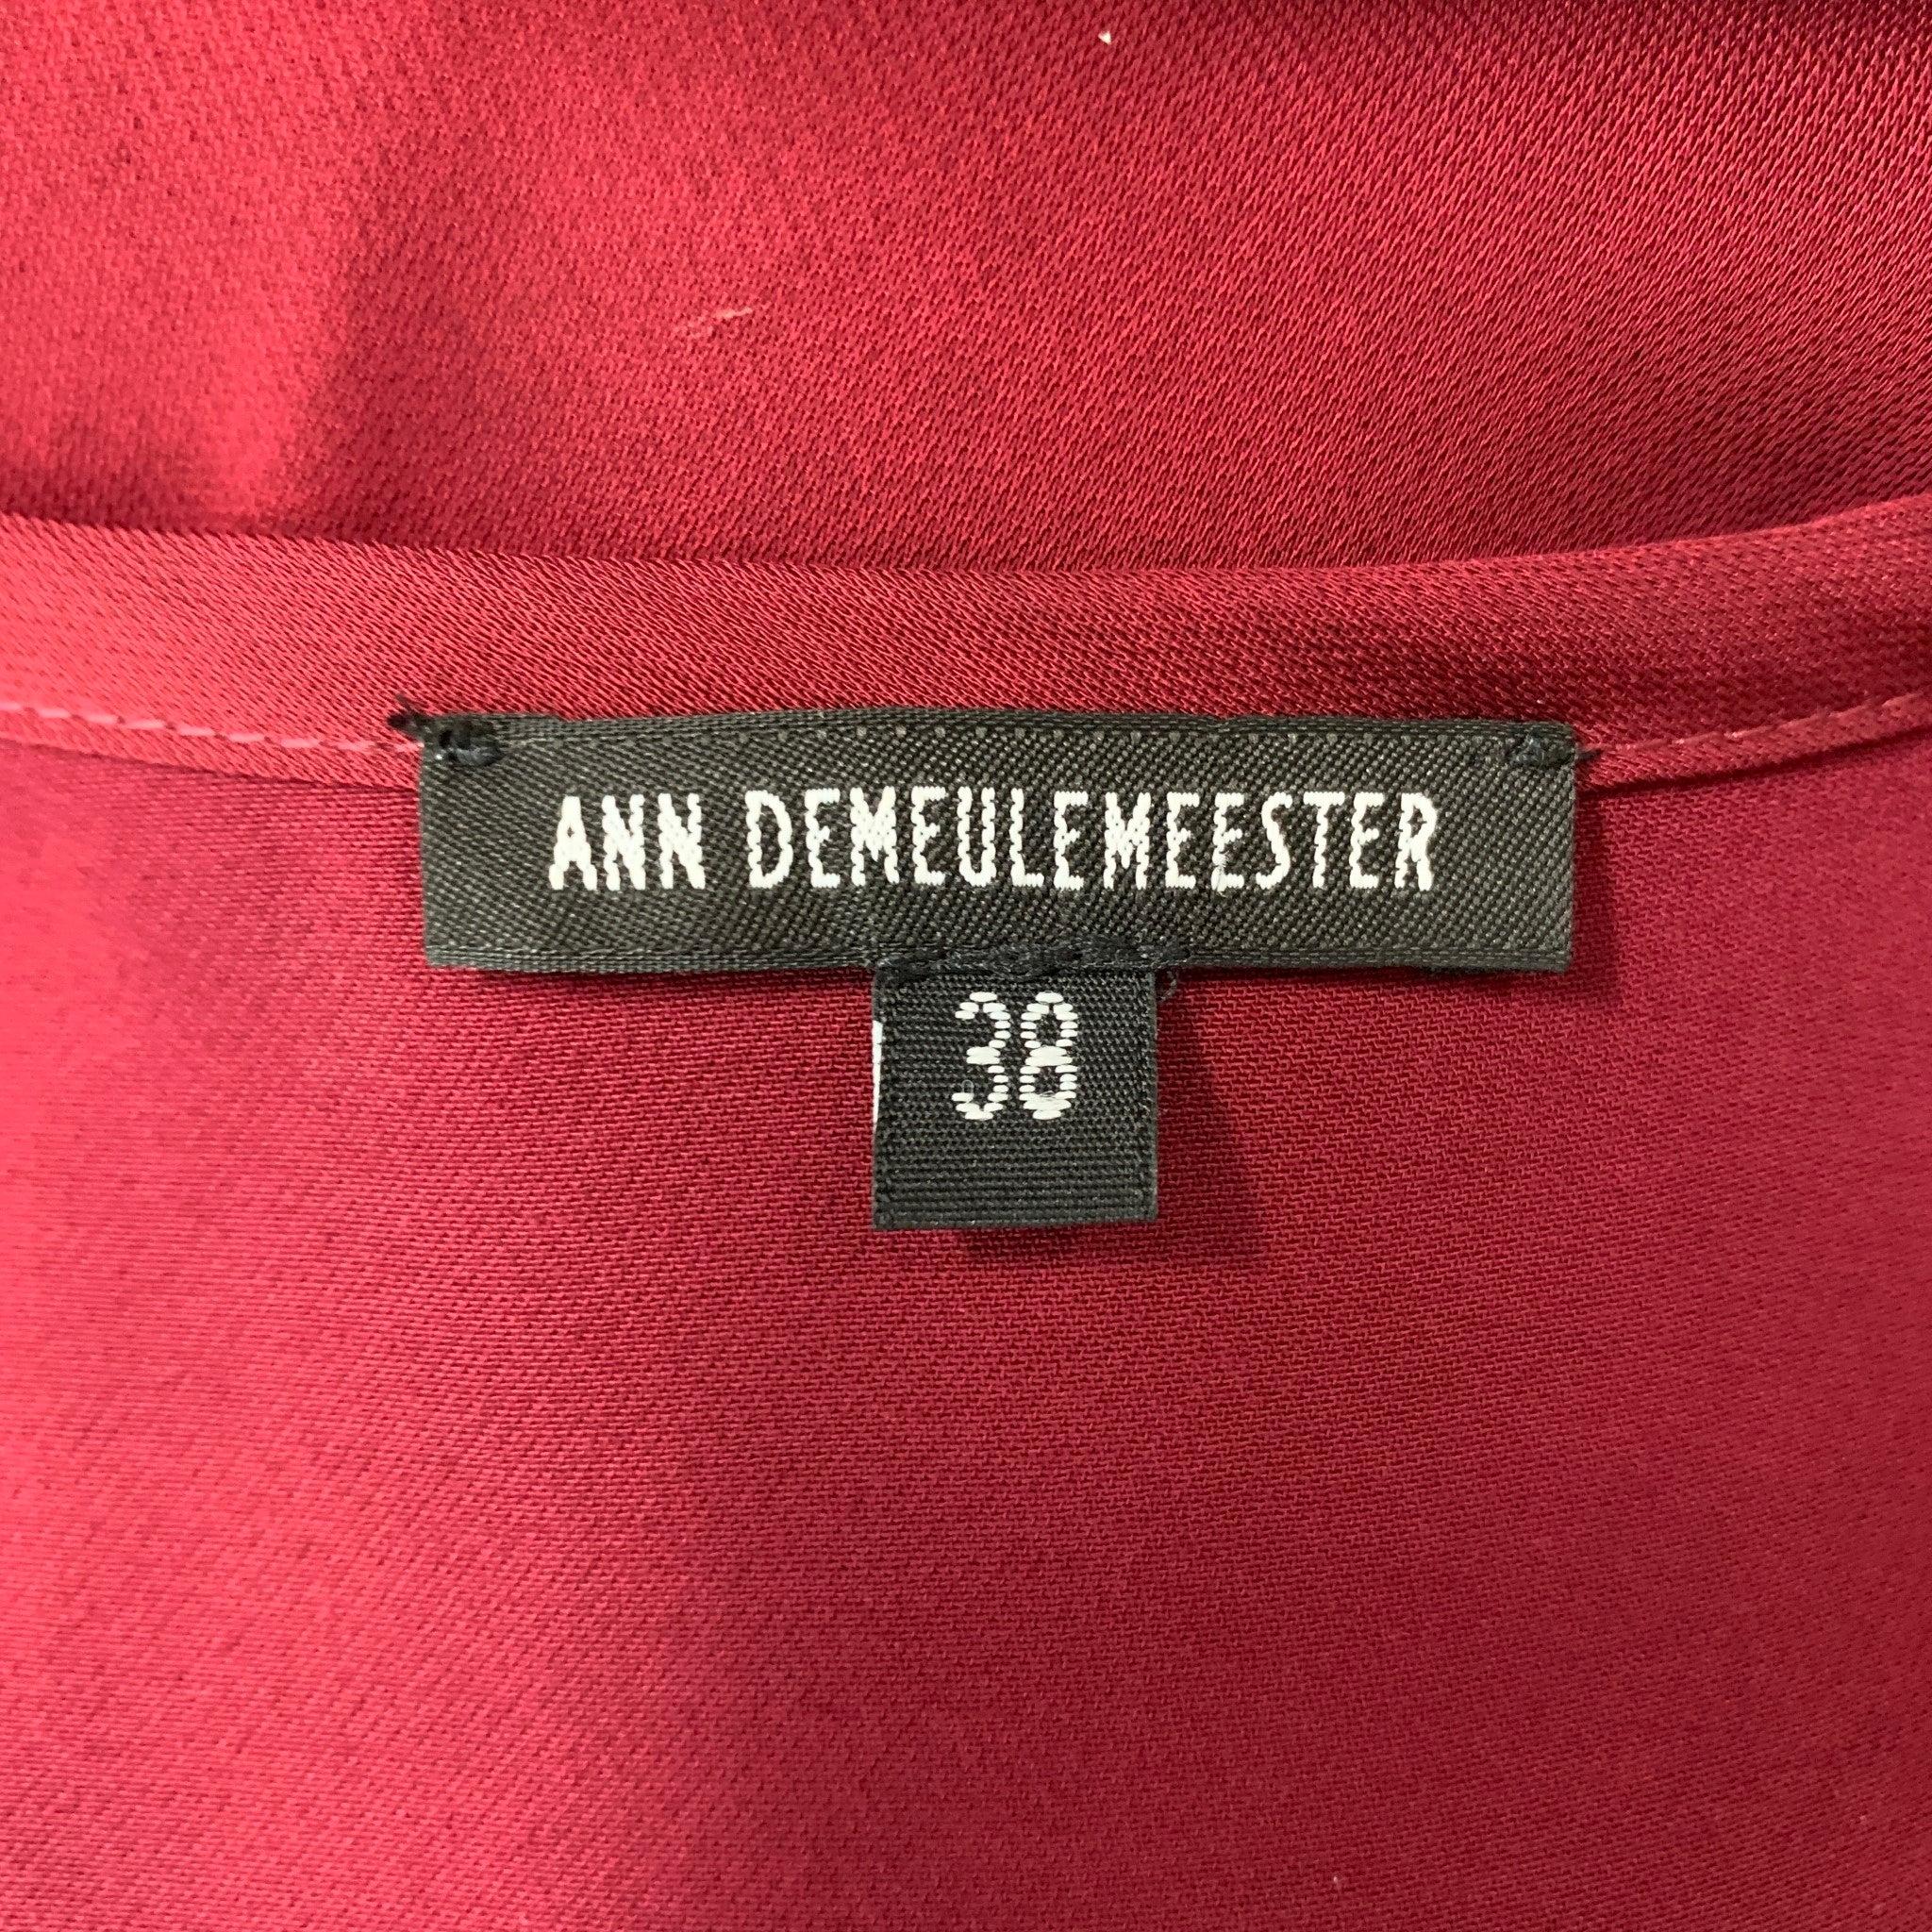 Women's ANN DEMEULEMEESTER Size 4 Burgundy Rayon Solid Dress For Sale